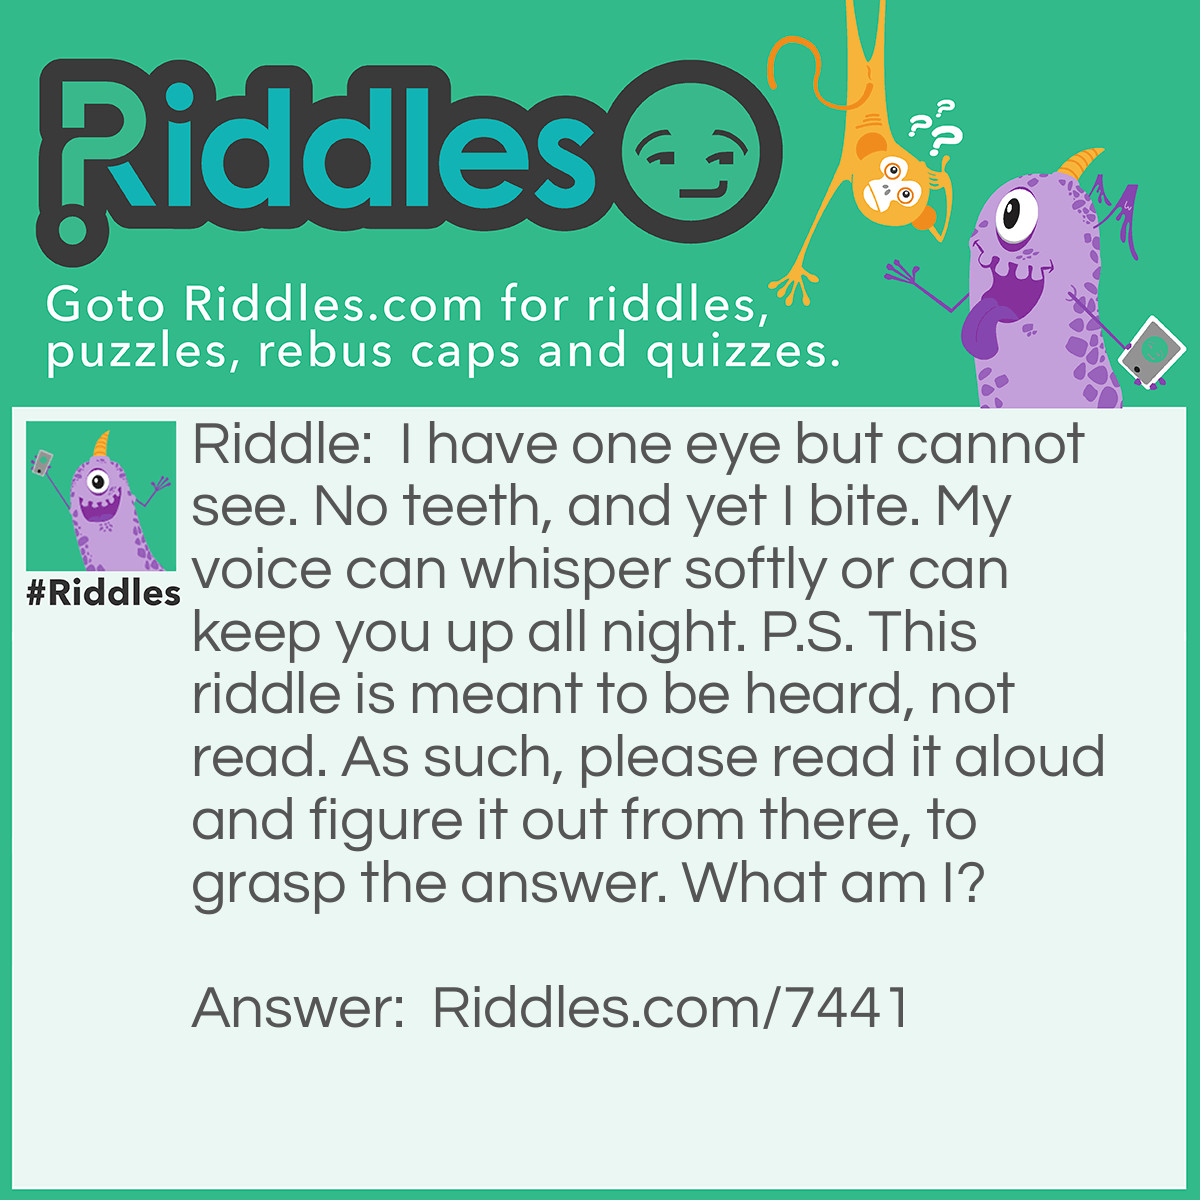 Riddle: I have one eye but cannot see. No teeth, and yet I bite. My voice can whisper softly or can keep you up all night. P.S. This riddle is meant to be heard, not read. As such, please read it aloud and figure it out from there, to grasp the answer. What am I? Answer: "Wind" - Reasoning: "Eye" sounds like "i", and the fact that the answer "cannot see" hints that this is the case. Wind, especially high wind, can feel biting, and in literature, the wind is often said to bring a "biting cold", or similar. The voice of the wind is depicted as being quiet or loud, depending on how strong the wind is. Loud winds are often associated with keeping people up during the night.